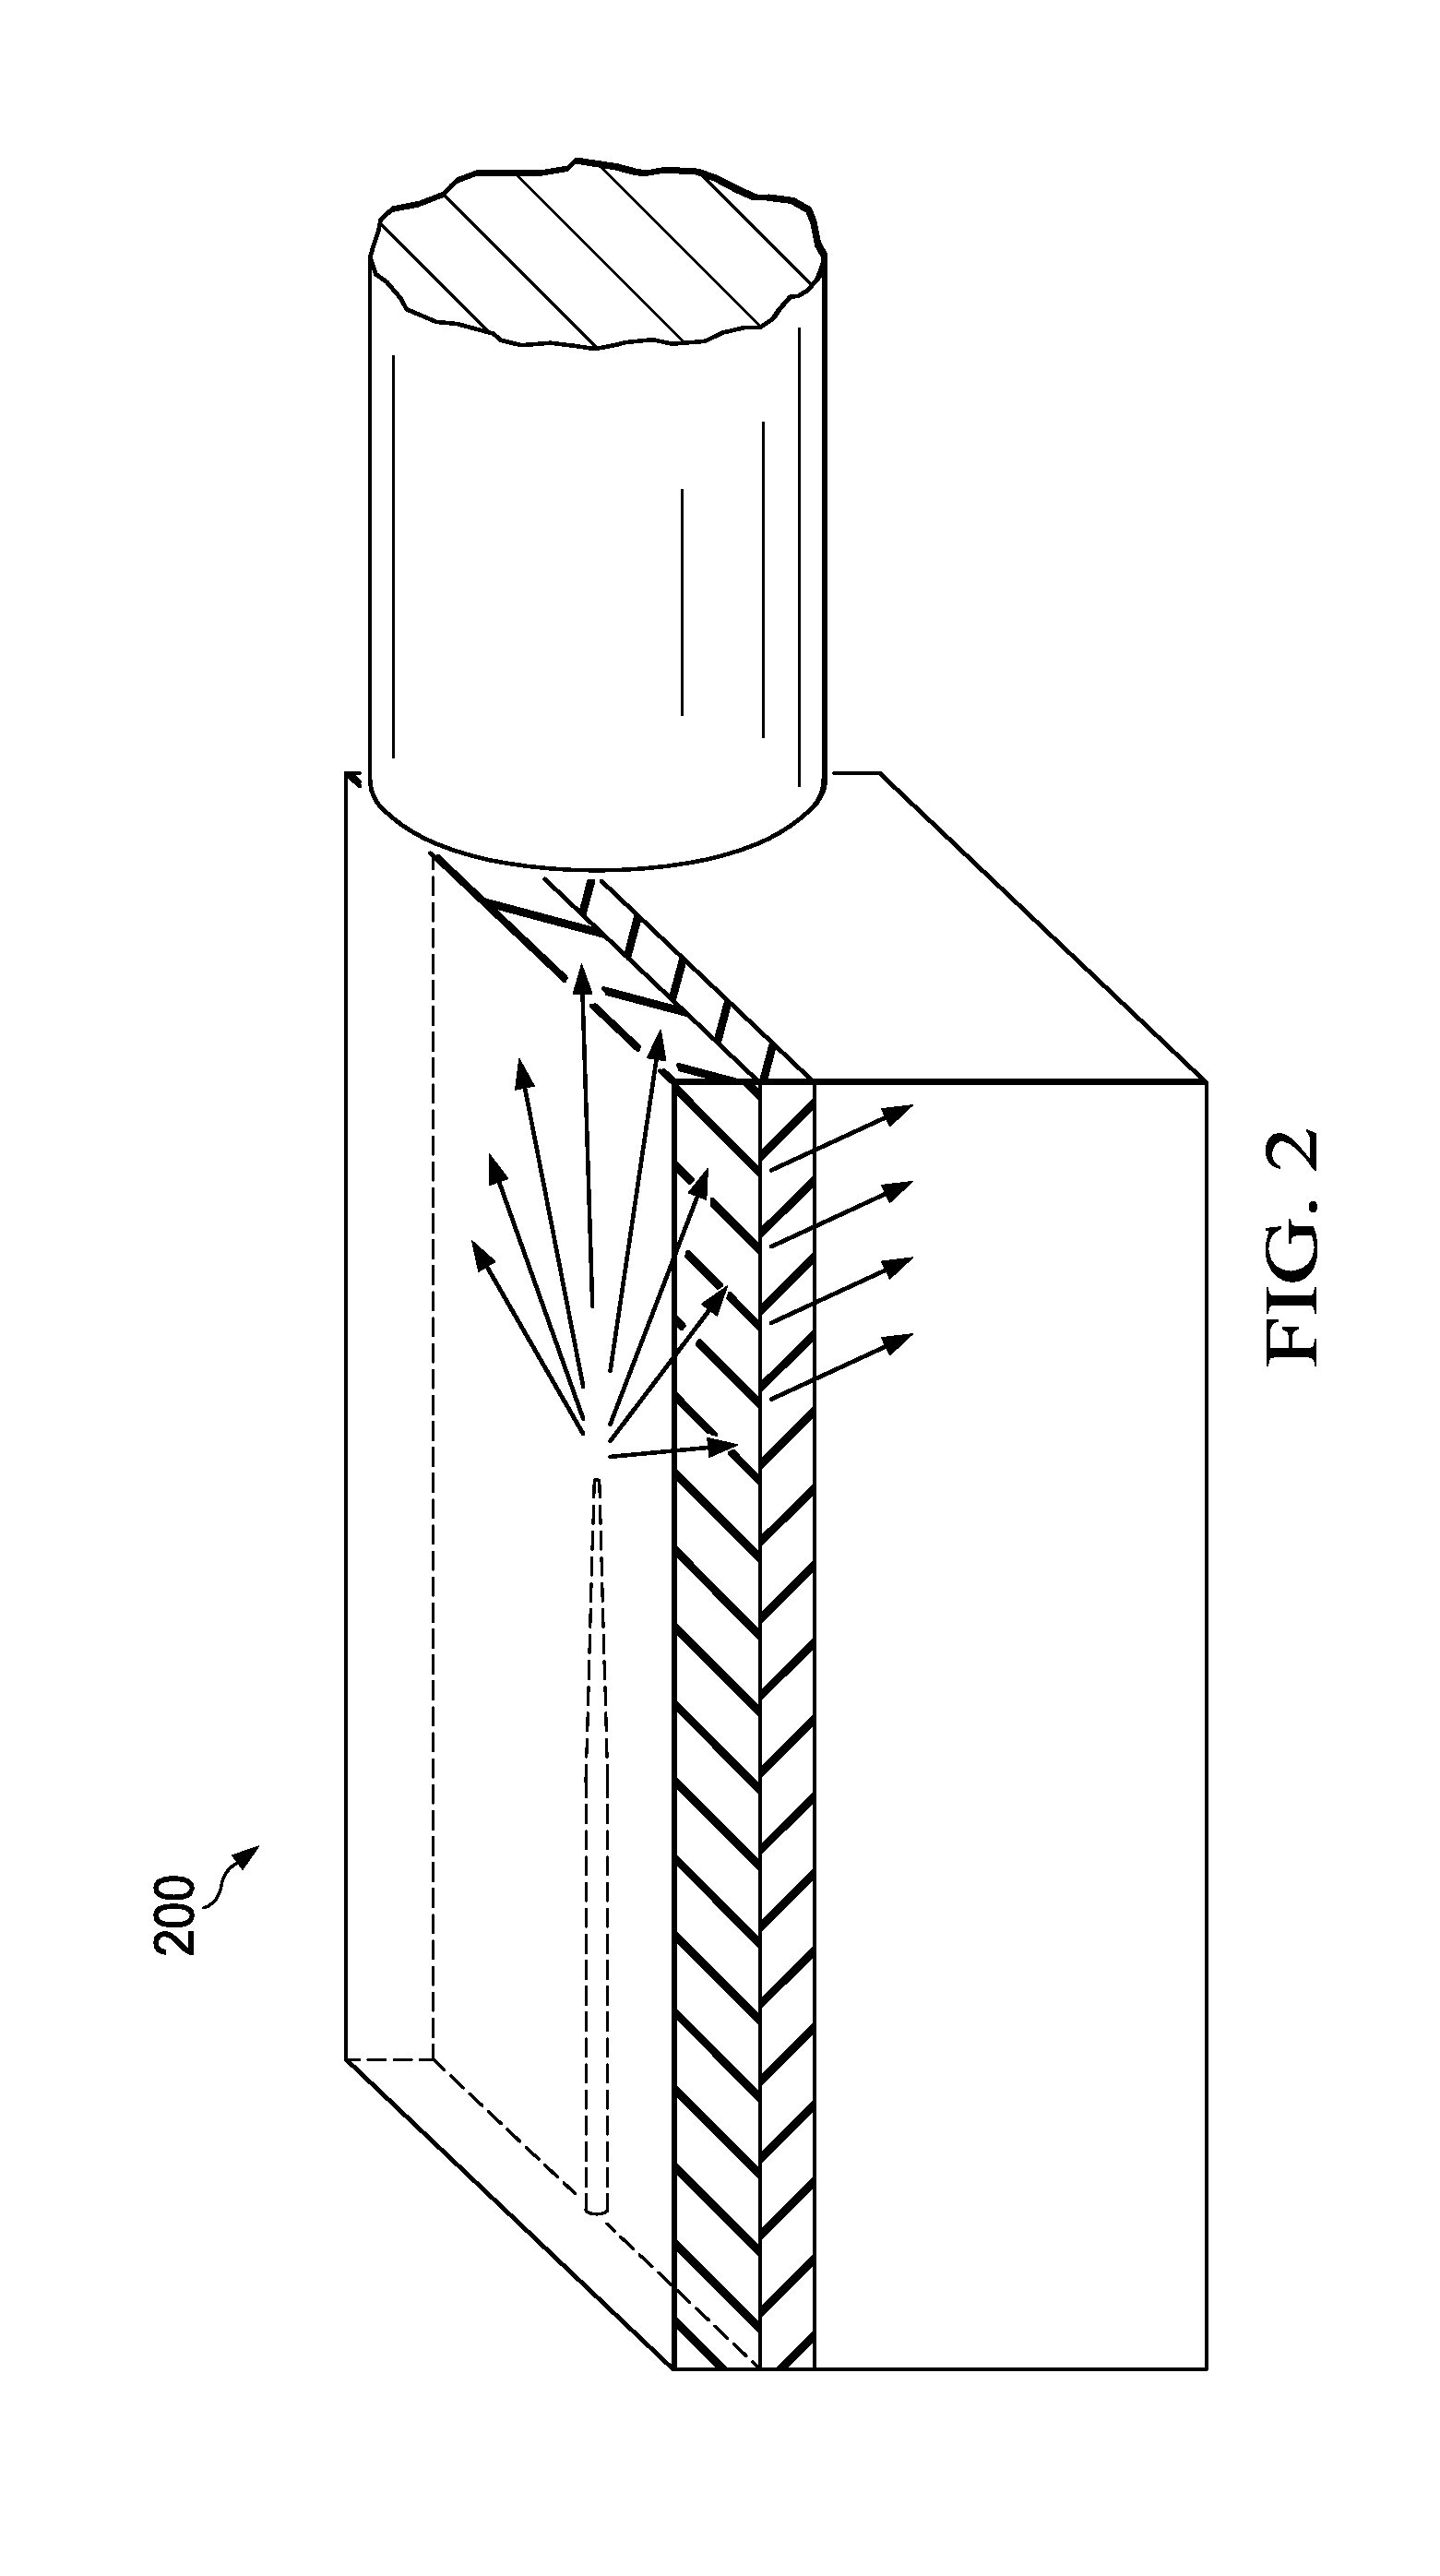 Apparatus and Method for an Optical Waveguide Edge Coupler for Photonic Integrated Chips